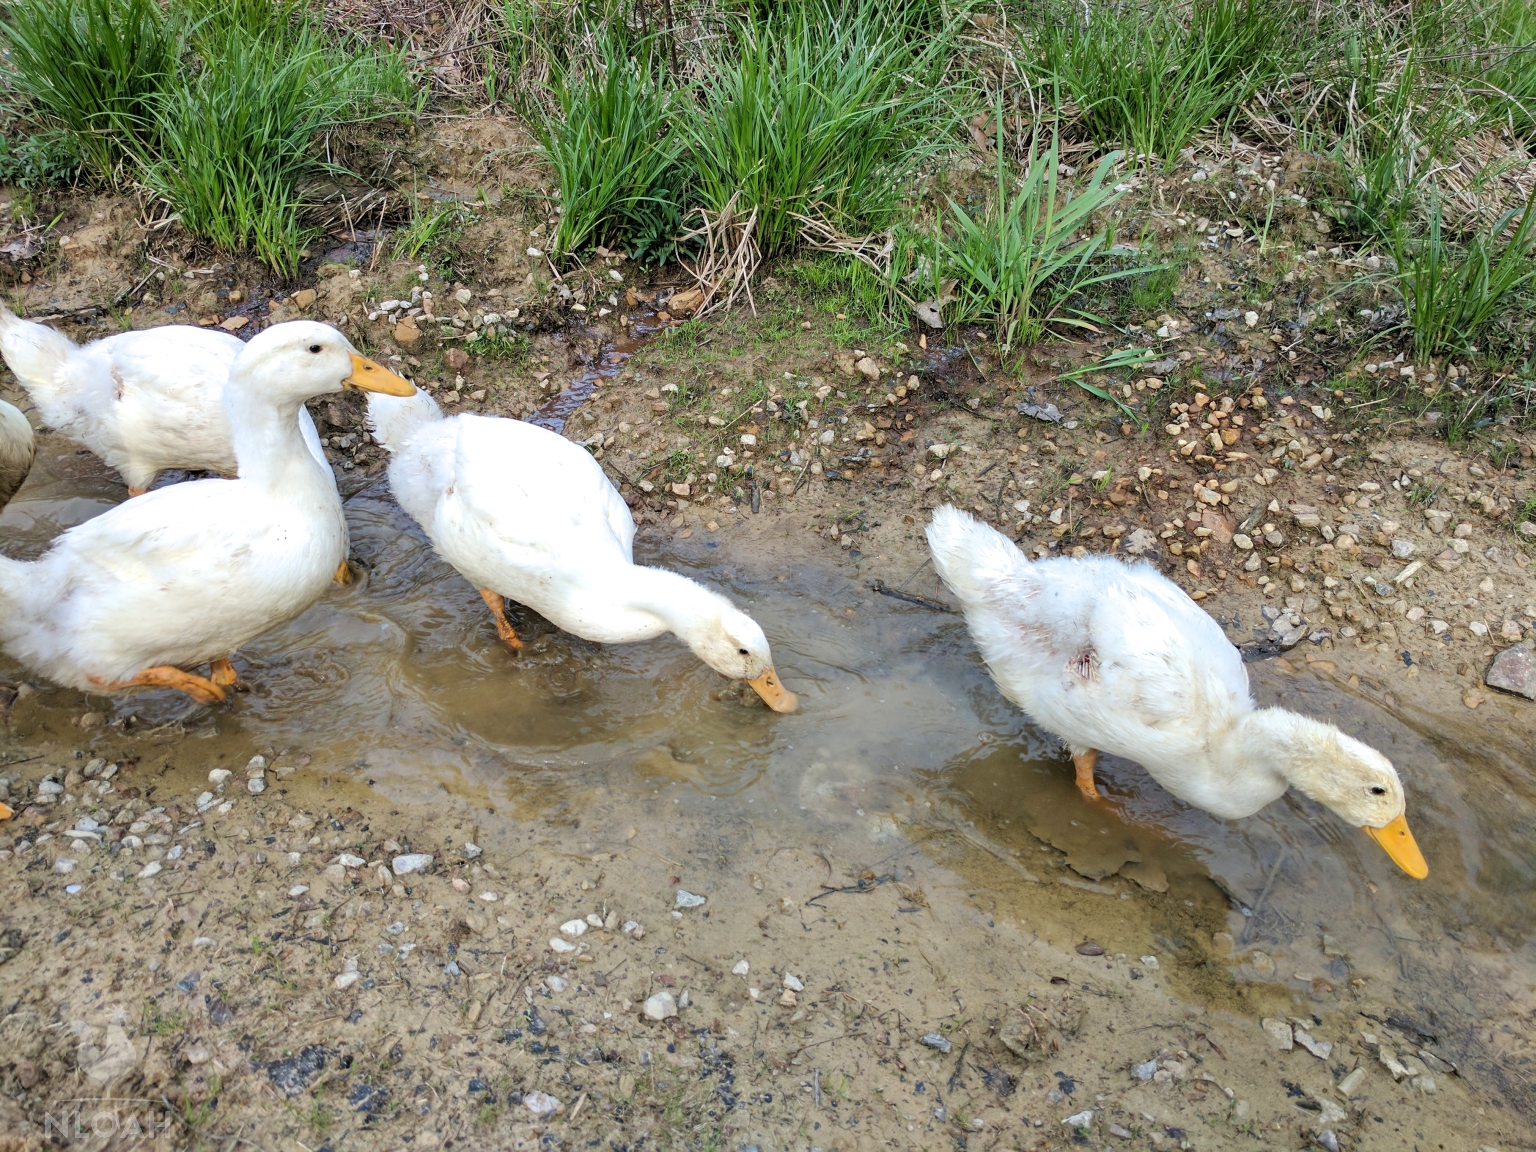 ducks drinking water from a puddle